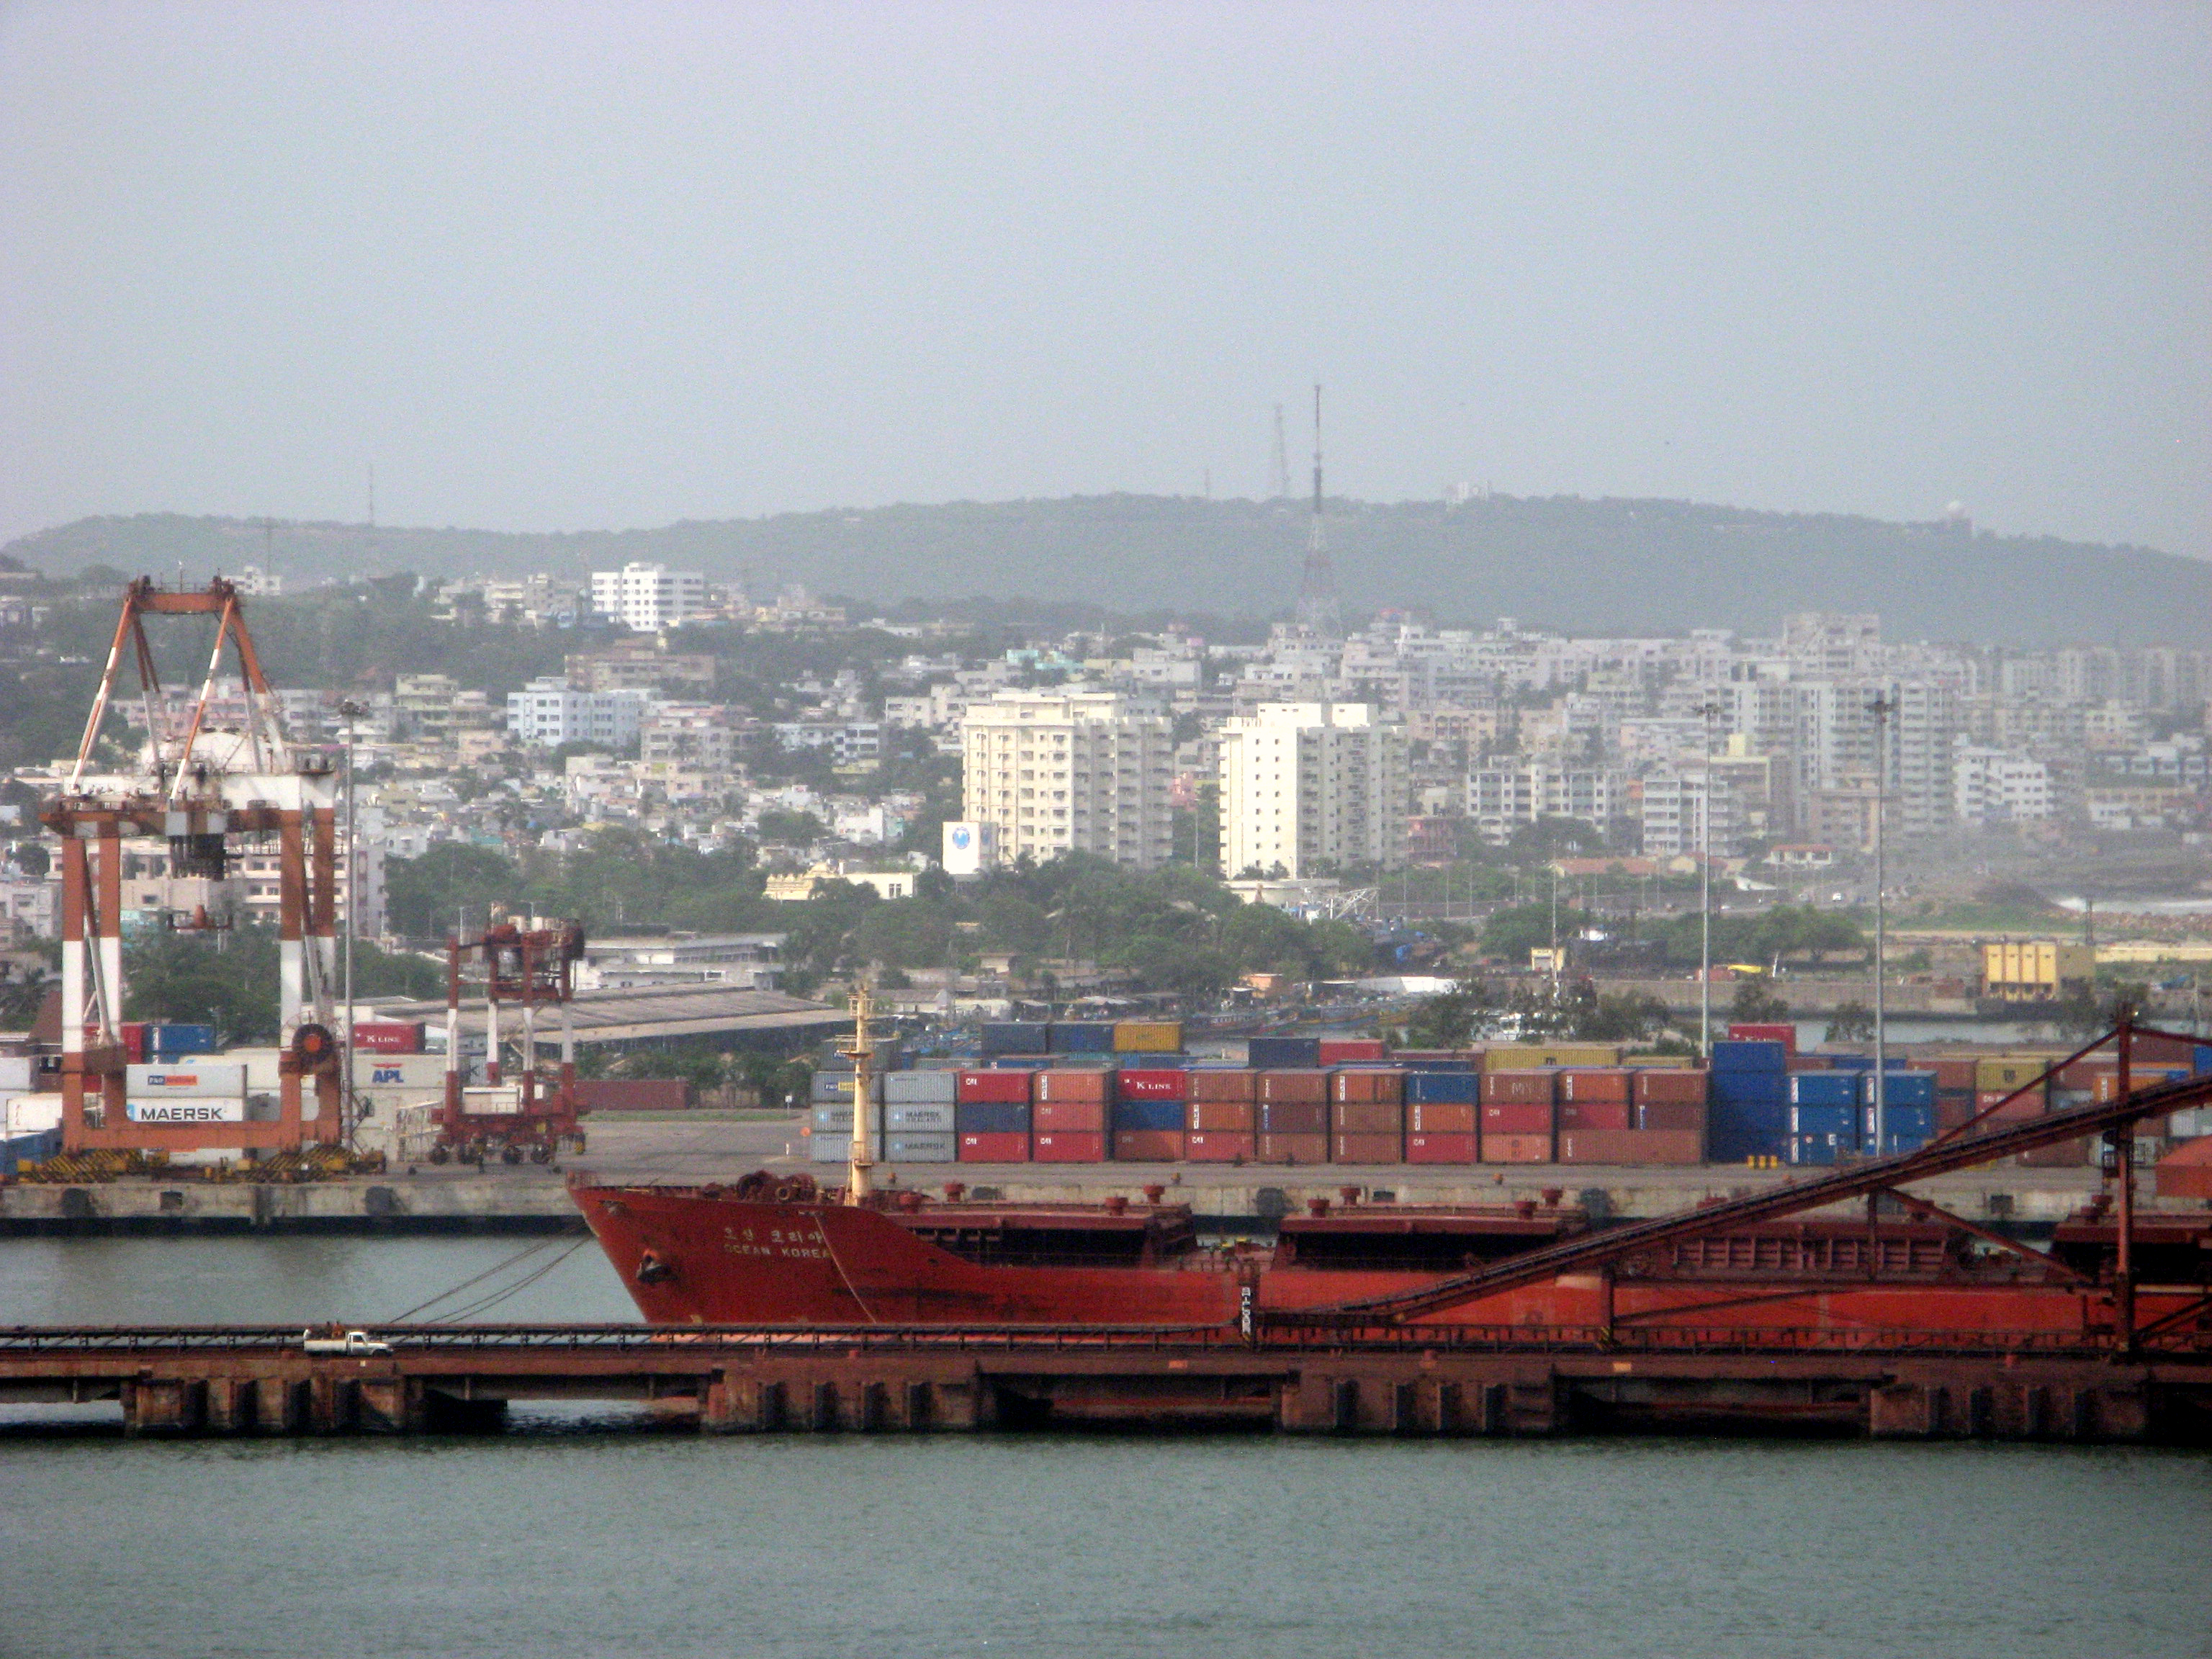 Port sector reforms got a major boost with passage of Major Ports Bill 2020 in september 2020